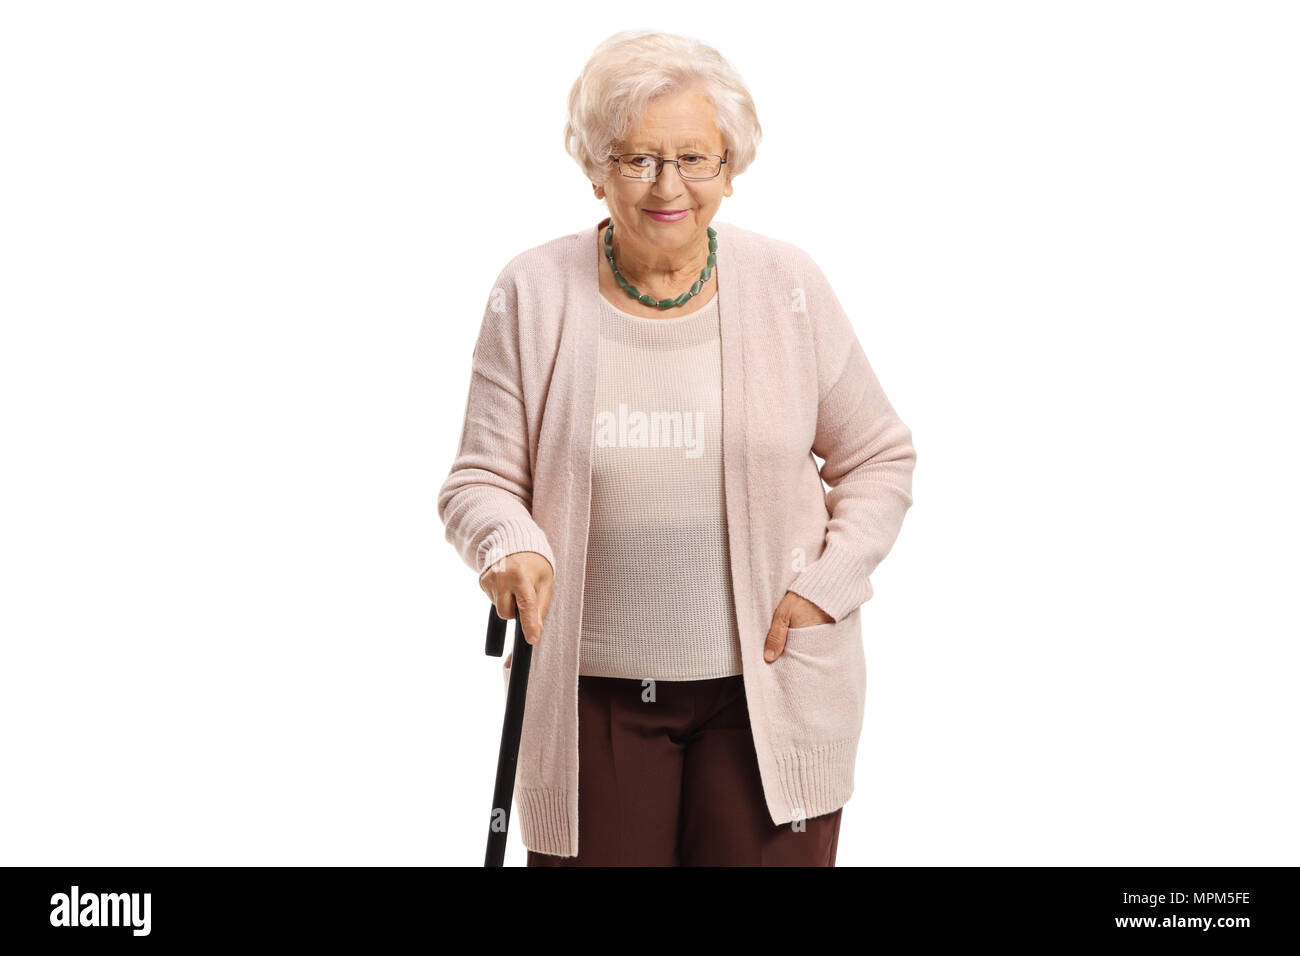 Elderly woman with a walking cane isolated on white background Stock Photo  - Alamy